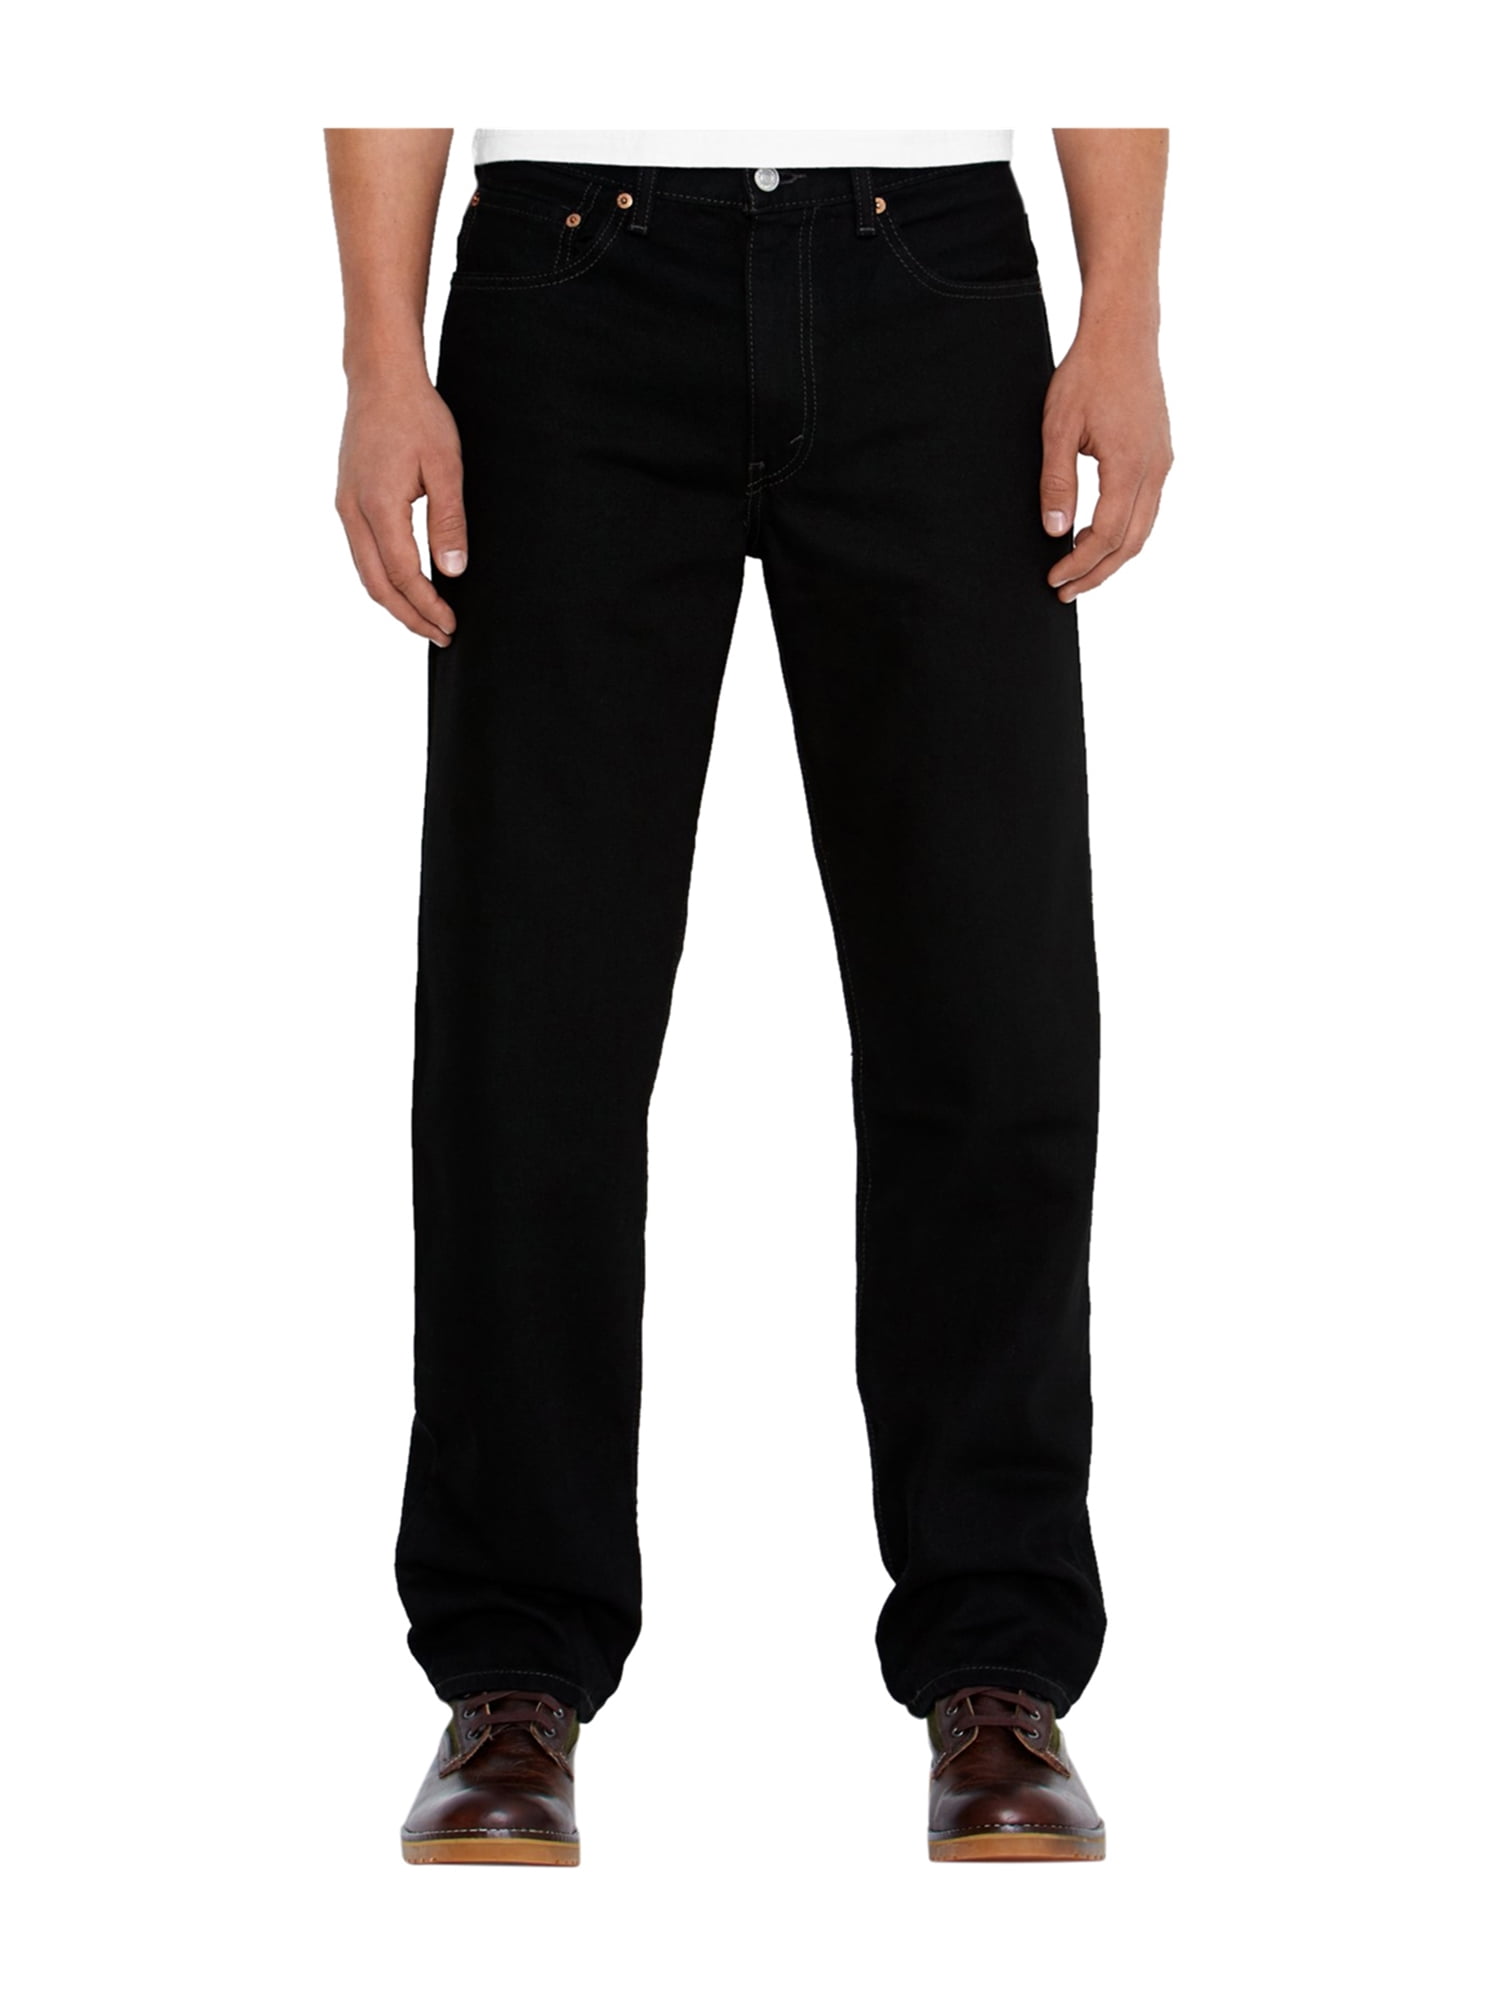 Levi's Mens 550 Tapered Relaxed Jeans black 35x30 | Walmart Canada